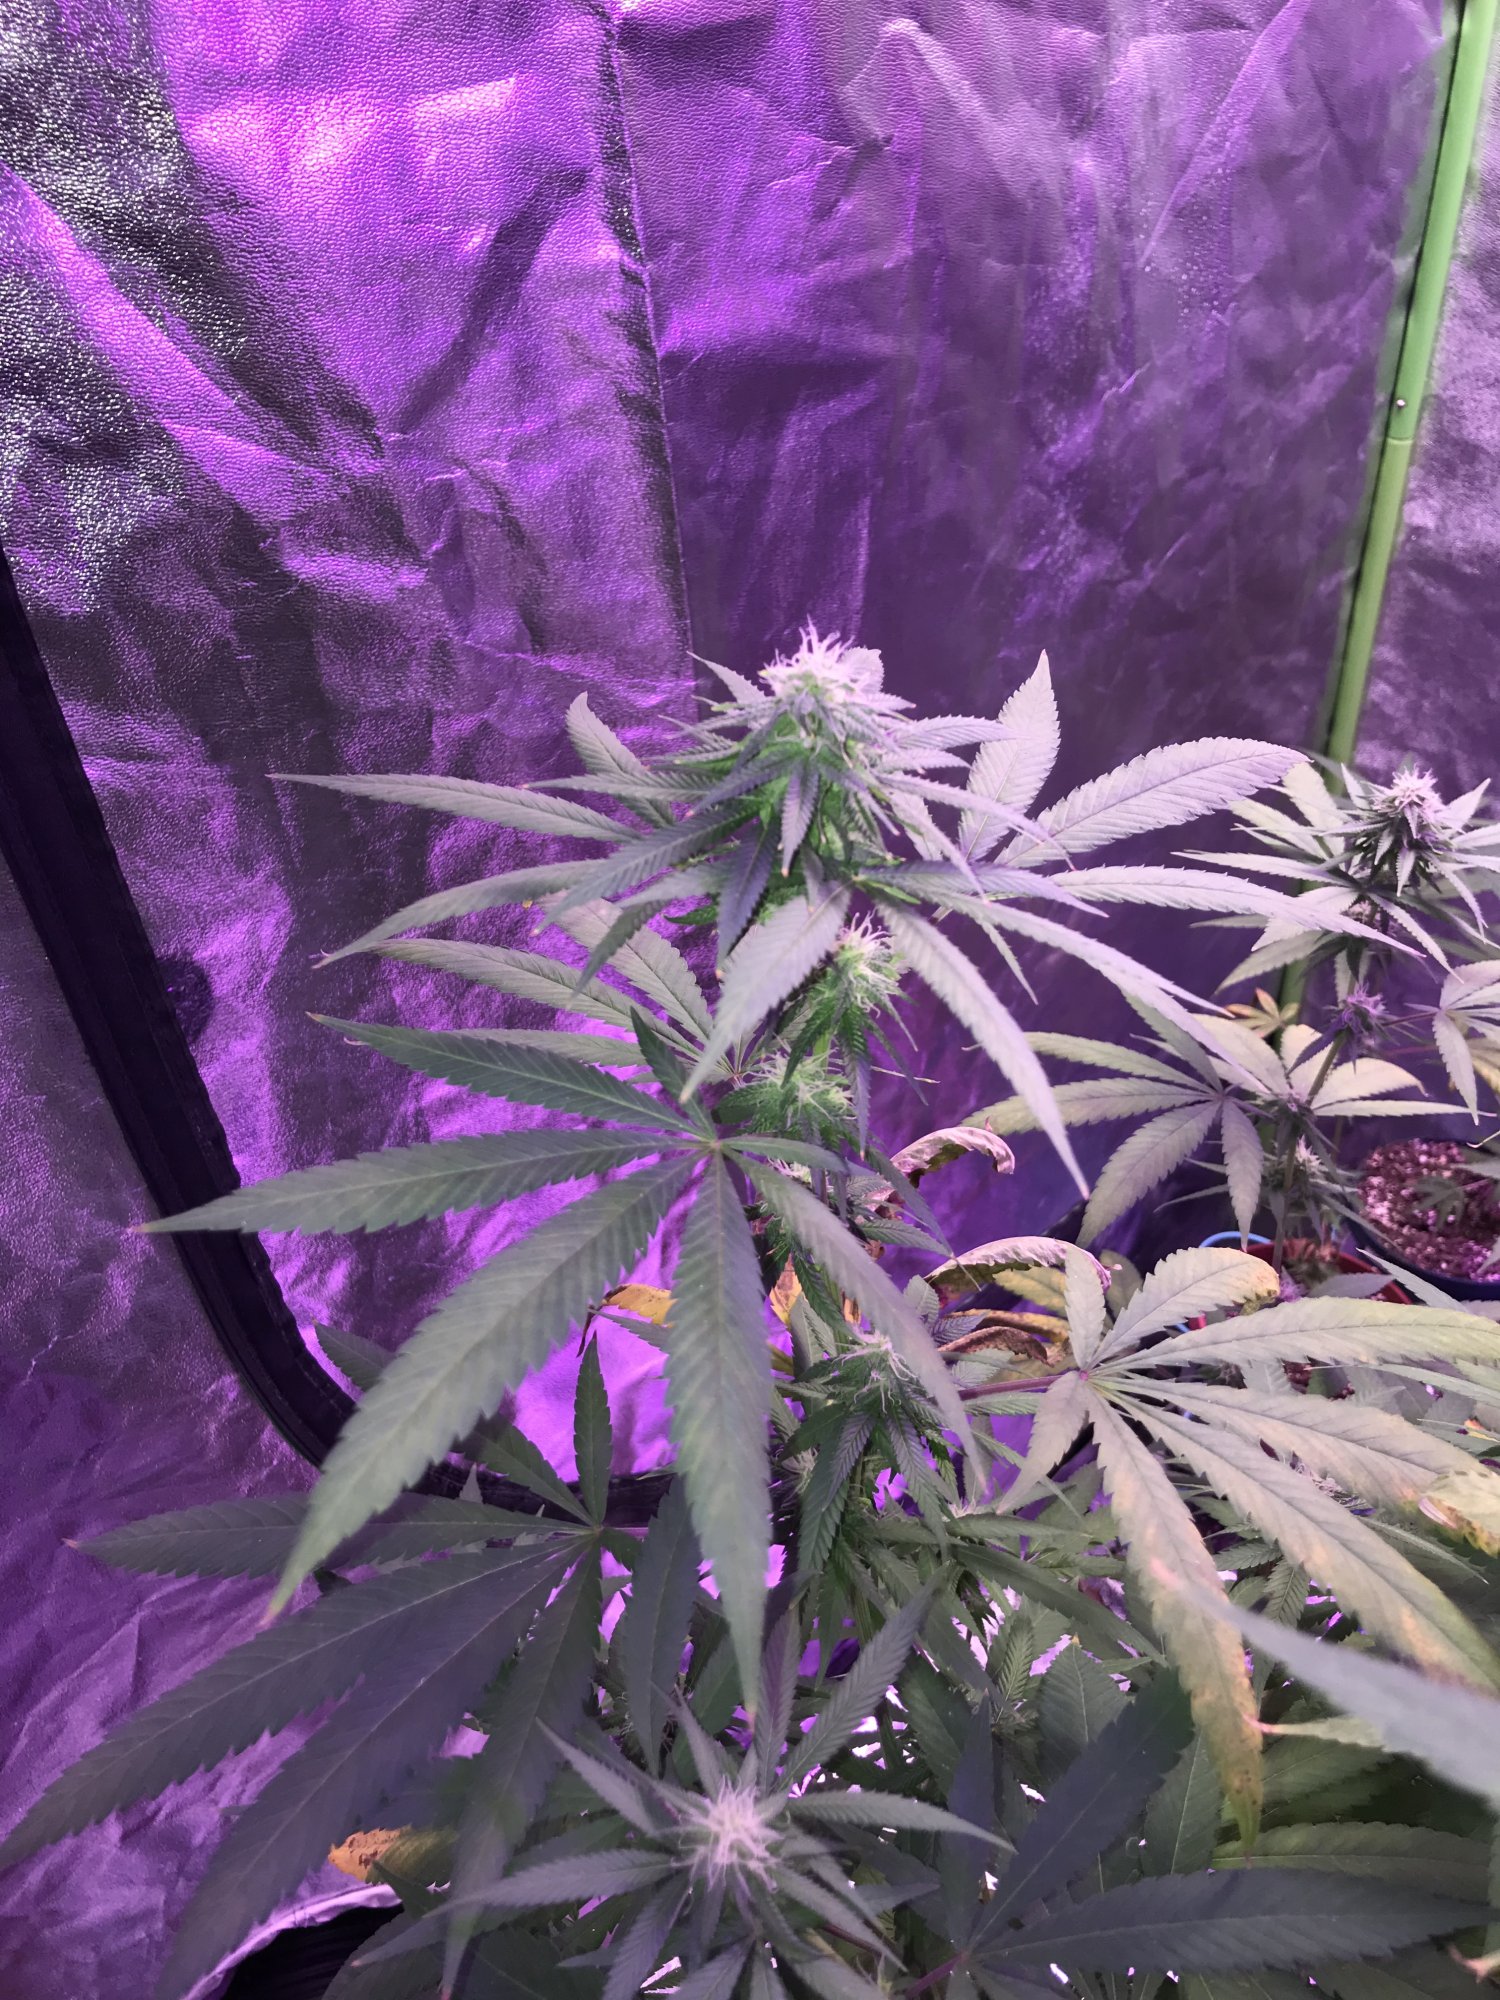 Nutrient burn or heat stress not sure what to do 11